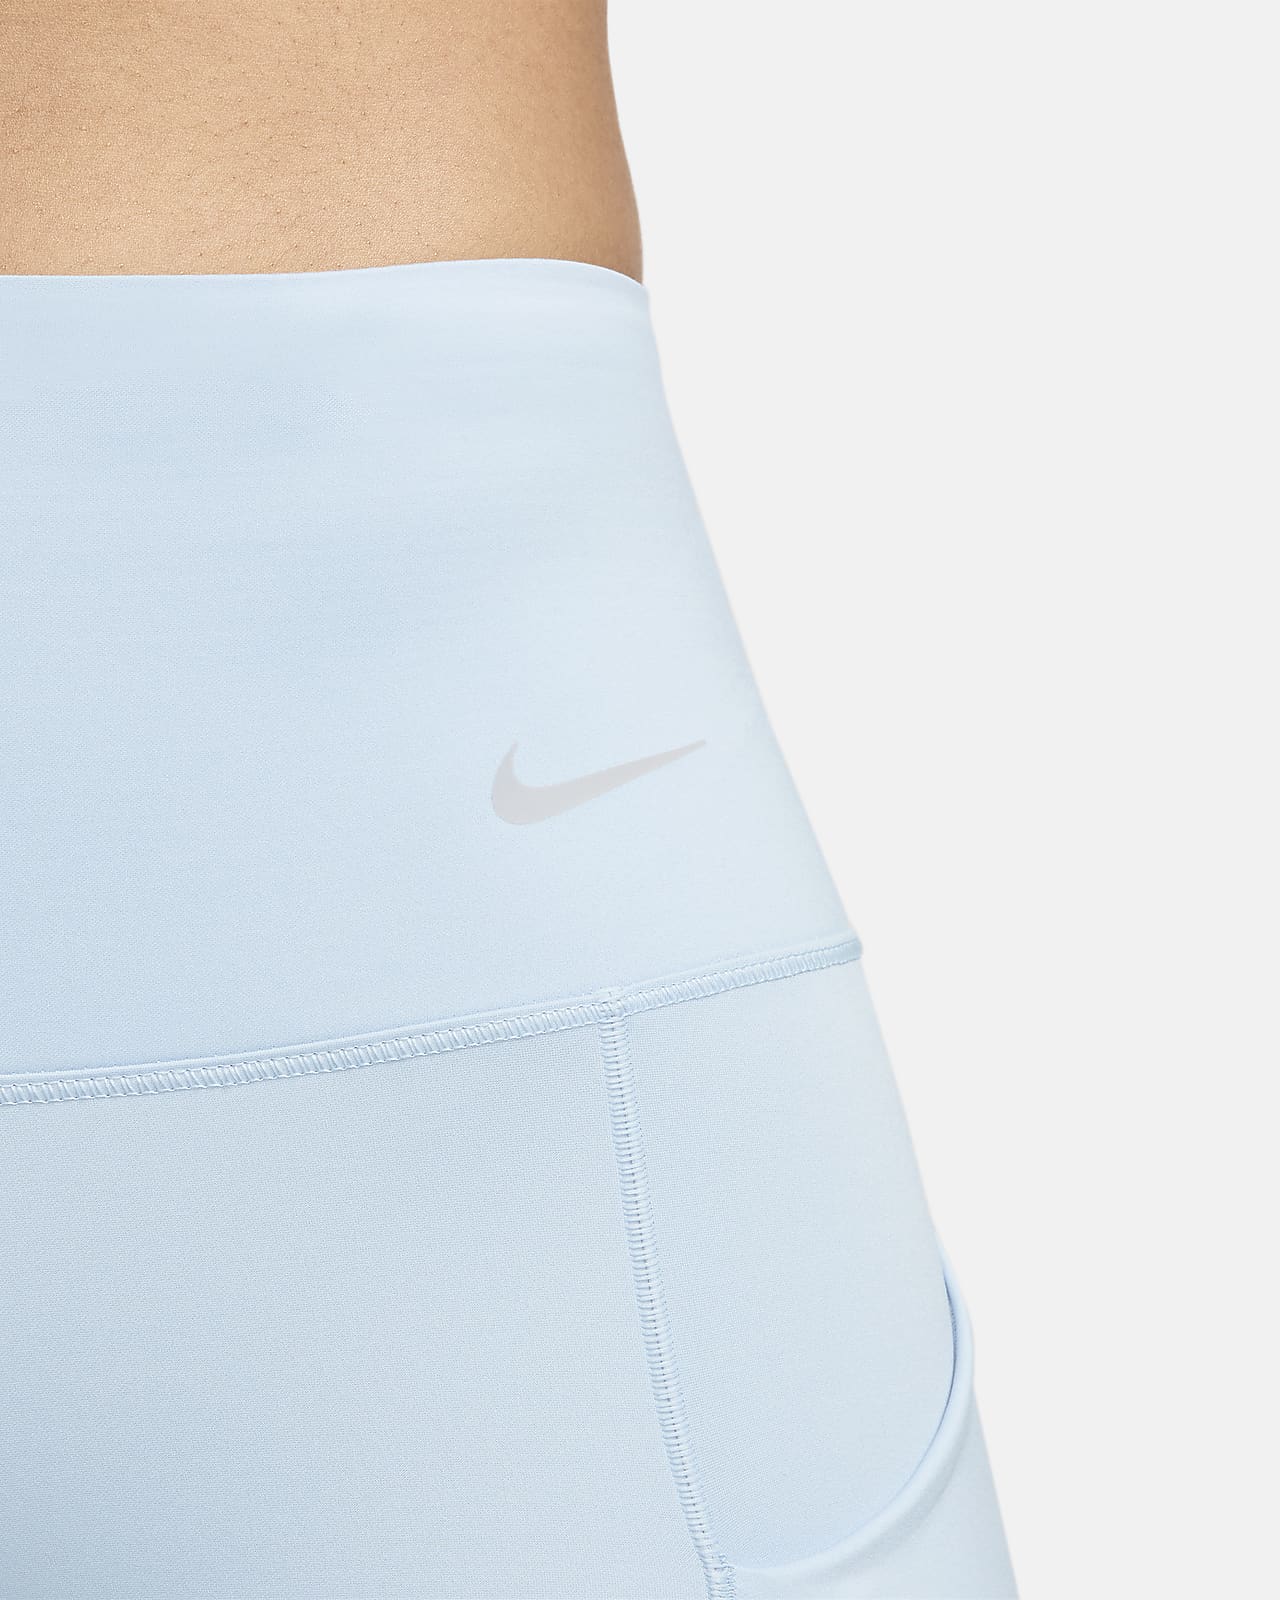 Nike PRO Stealth LUXE Mid Rise Leggings with side Pockets Light